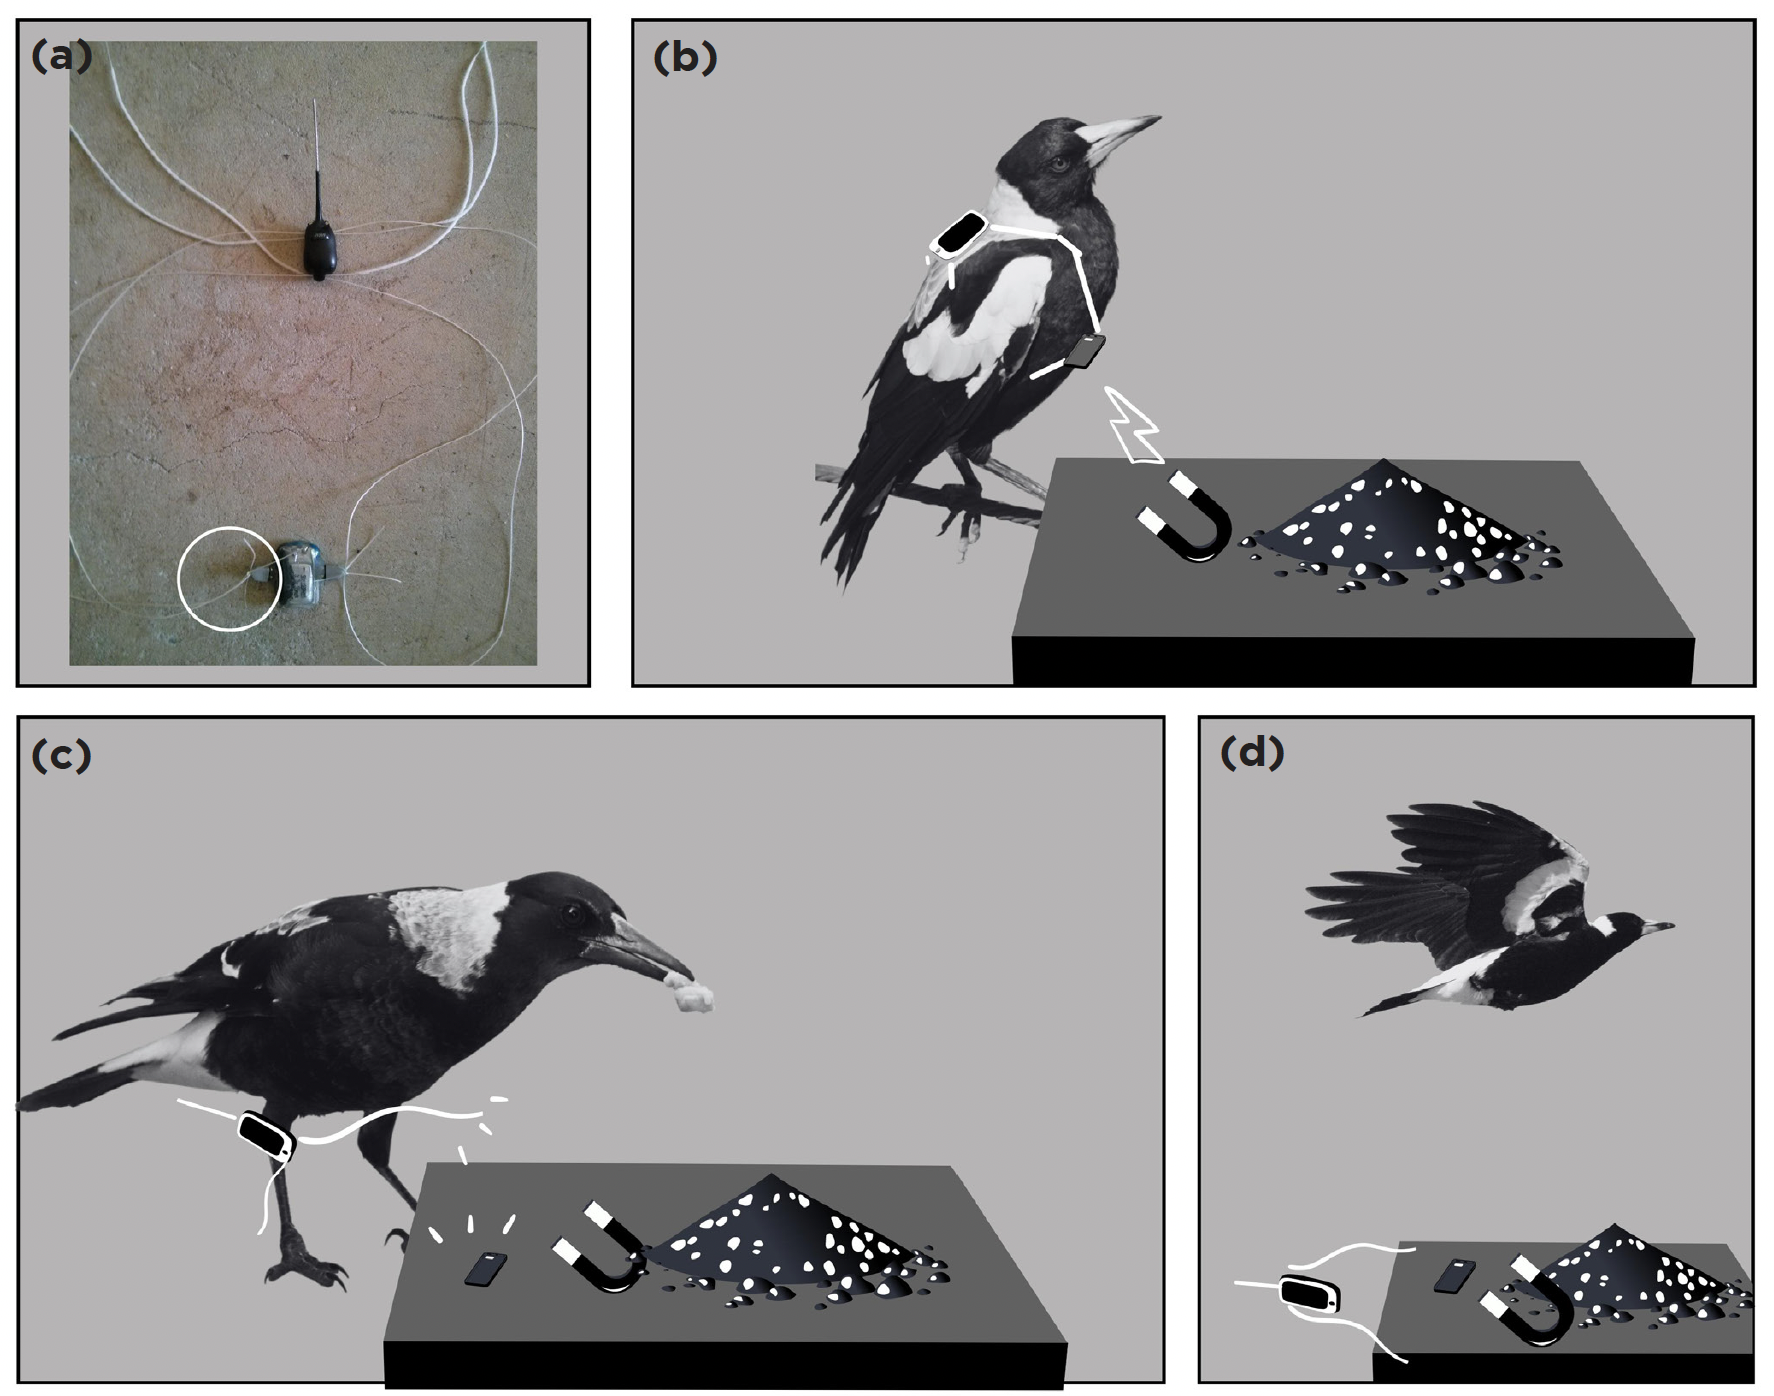 (a) The harness and tracker, (b)-(d) diagrams showing how the harness detaches through contact with a magnet. (Image: J. Crampton et al., 2022/Australian Field Ornithology)